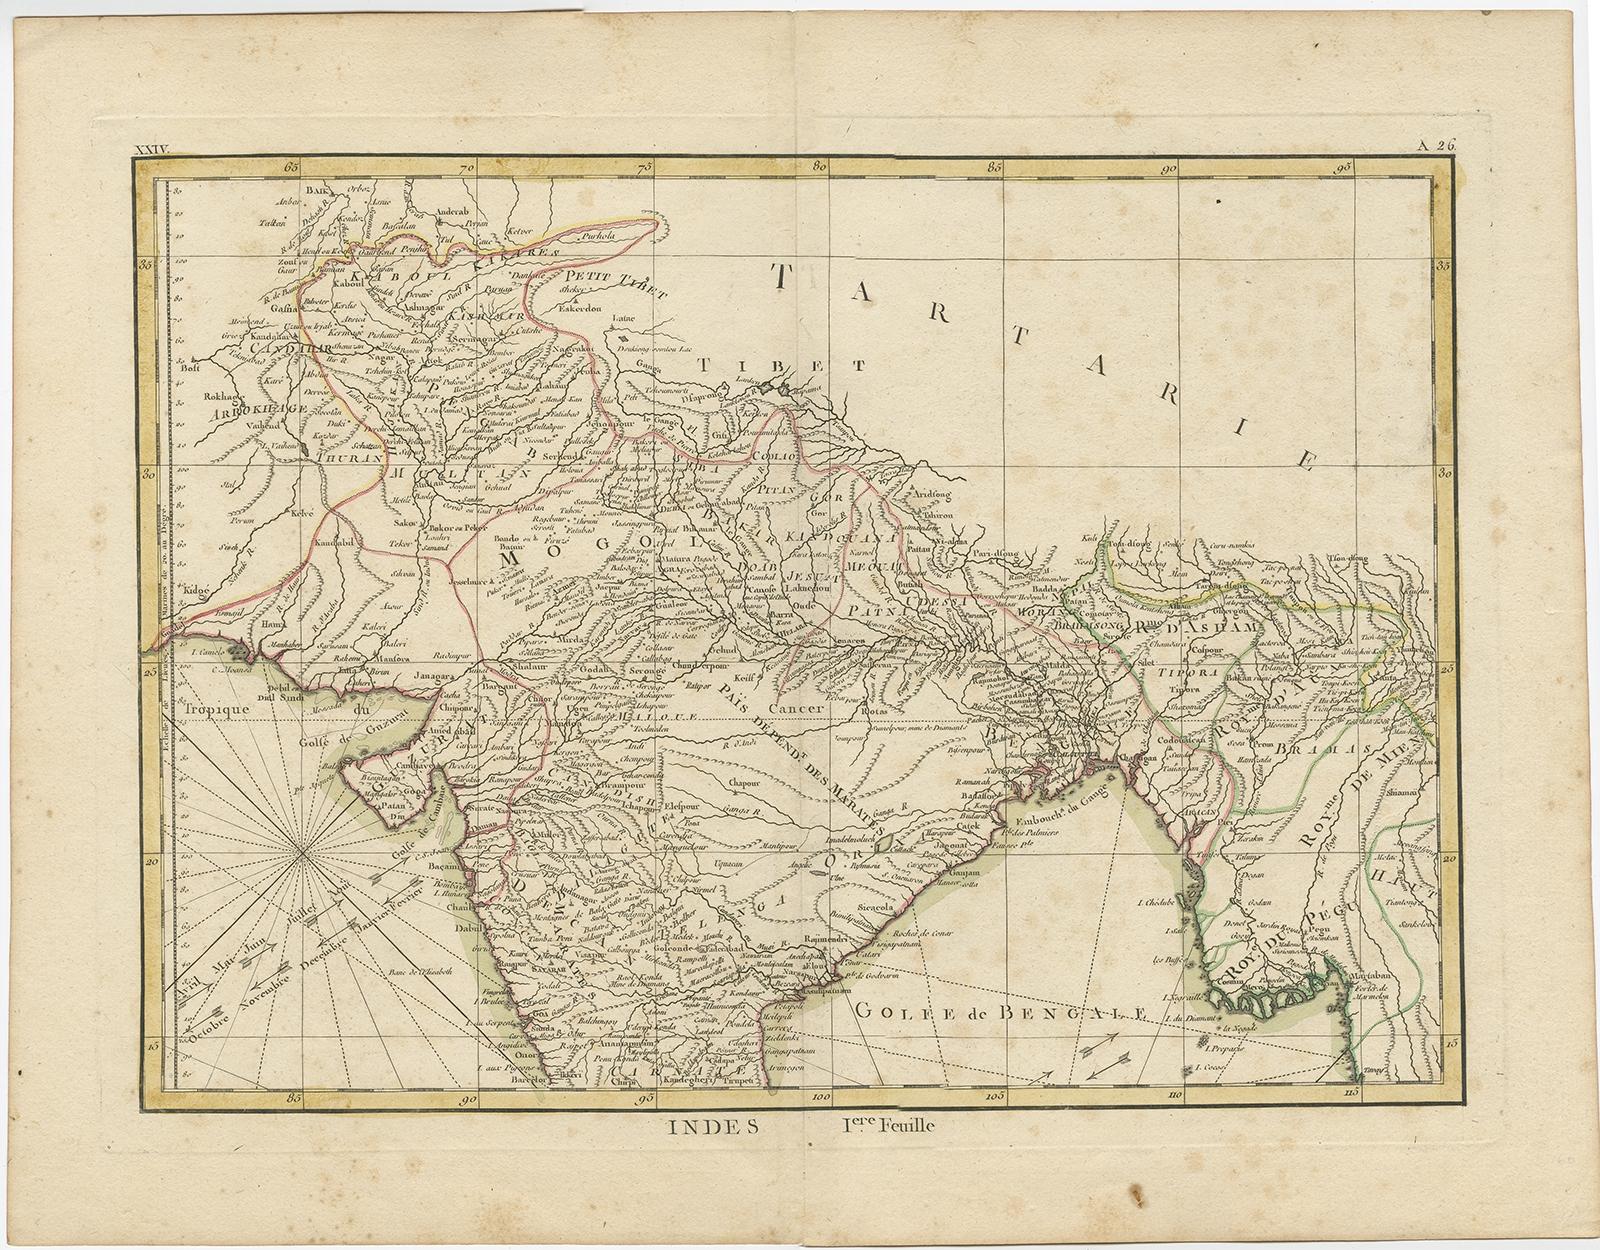 Description: Antique map titled 'Indes Iere Feuille'. 

Old map of northern India. Covers the subcontinent from Kandahar east as far as Burma (Pegu) and south to just past Goa. Names countless important Indian cities, river systems and mines.